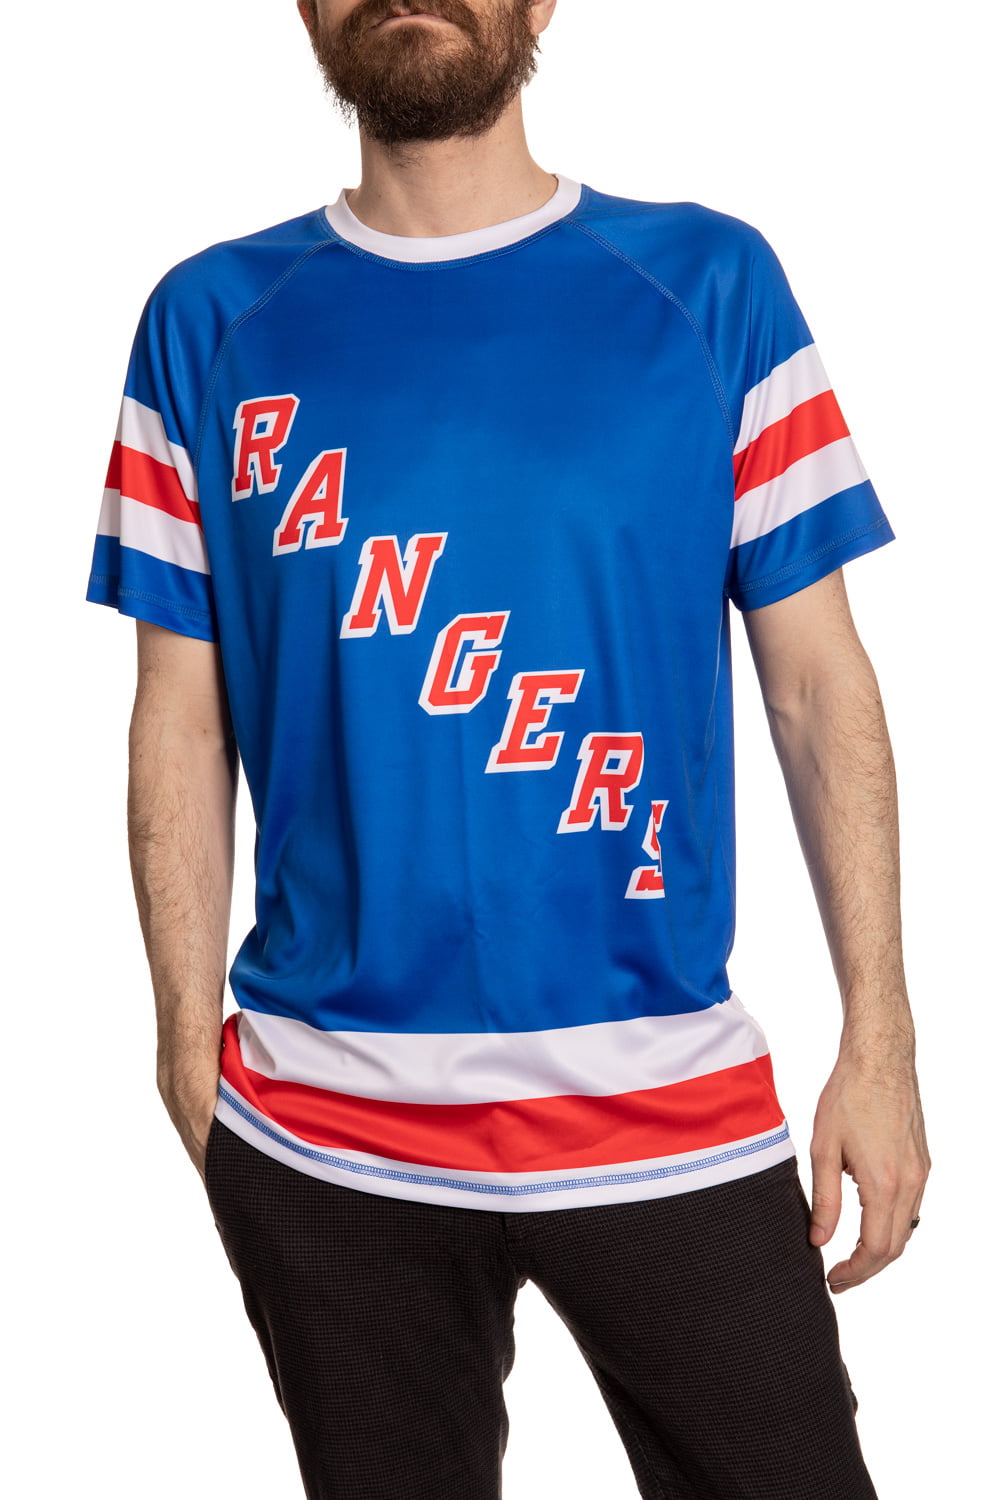 New York Rangers Short Sleeve Rashguard Front View. Blue Shirt With White and Red Accents.